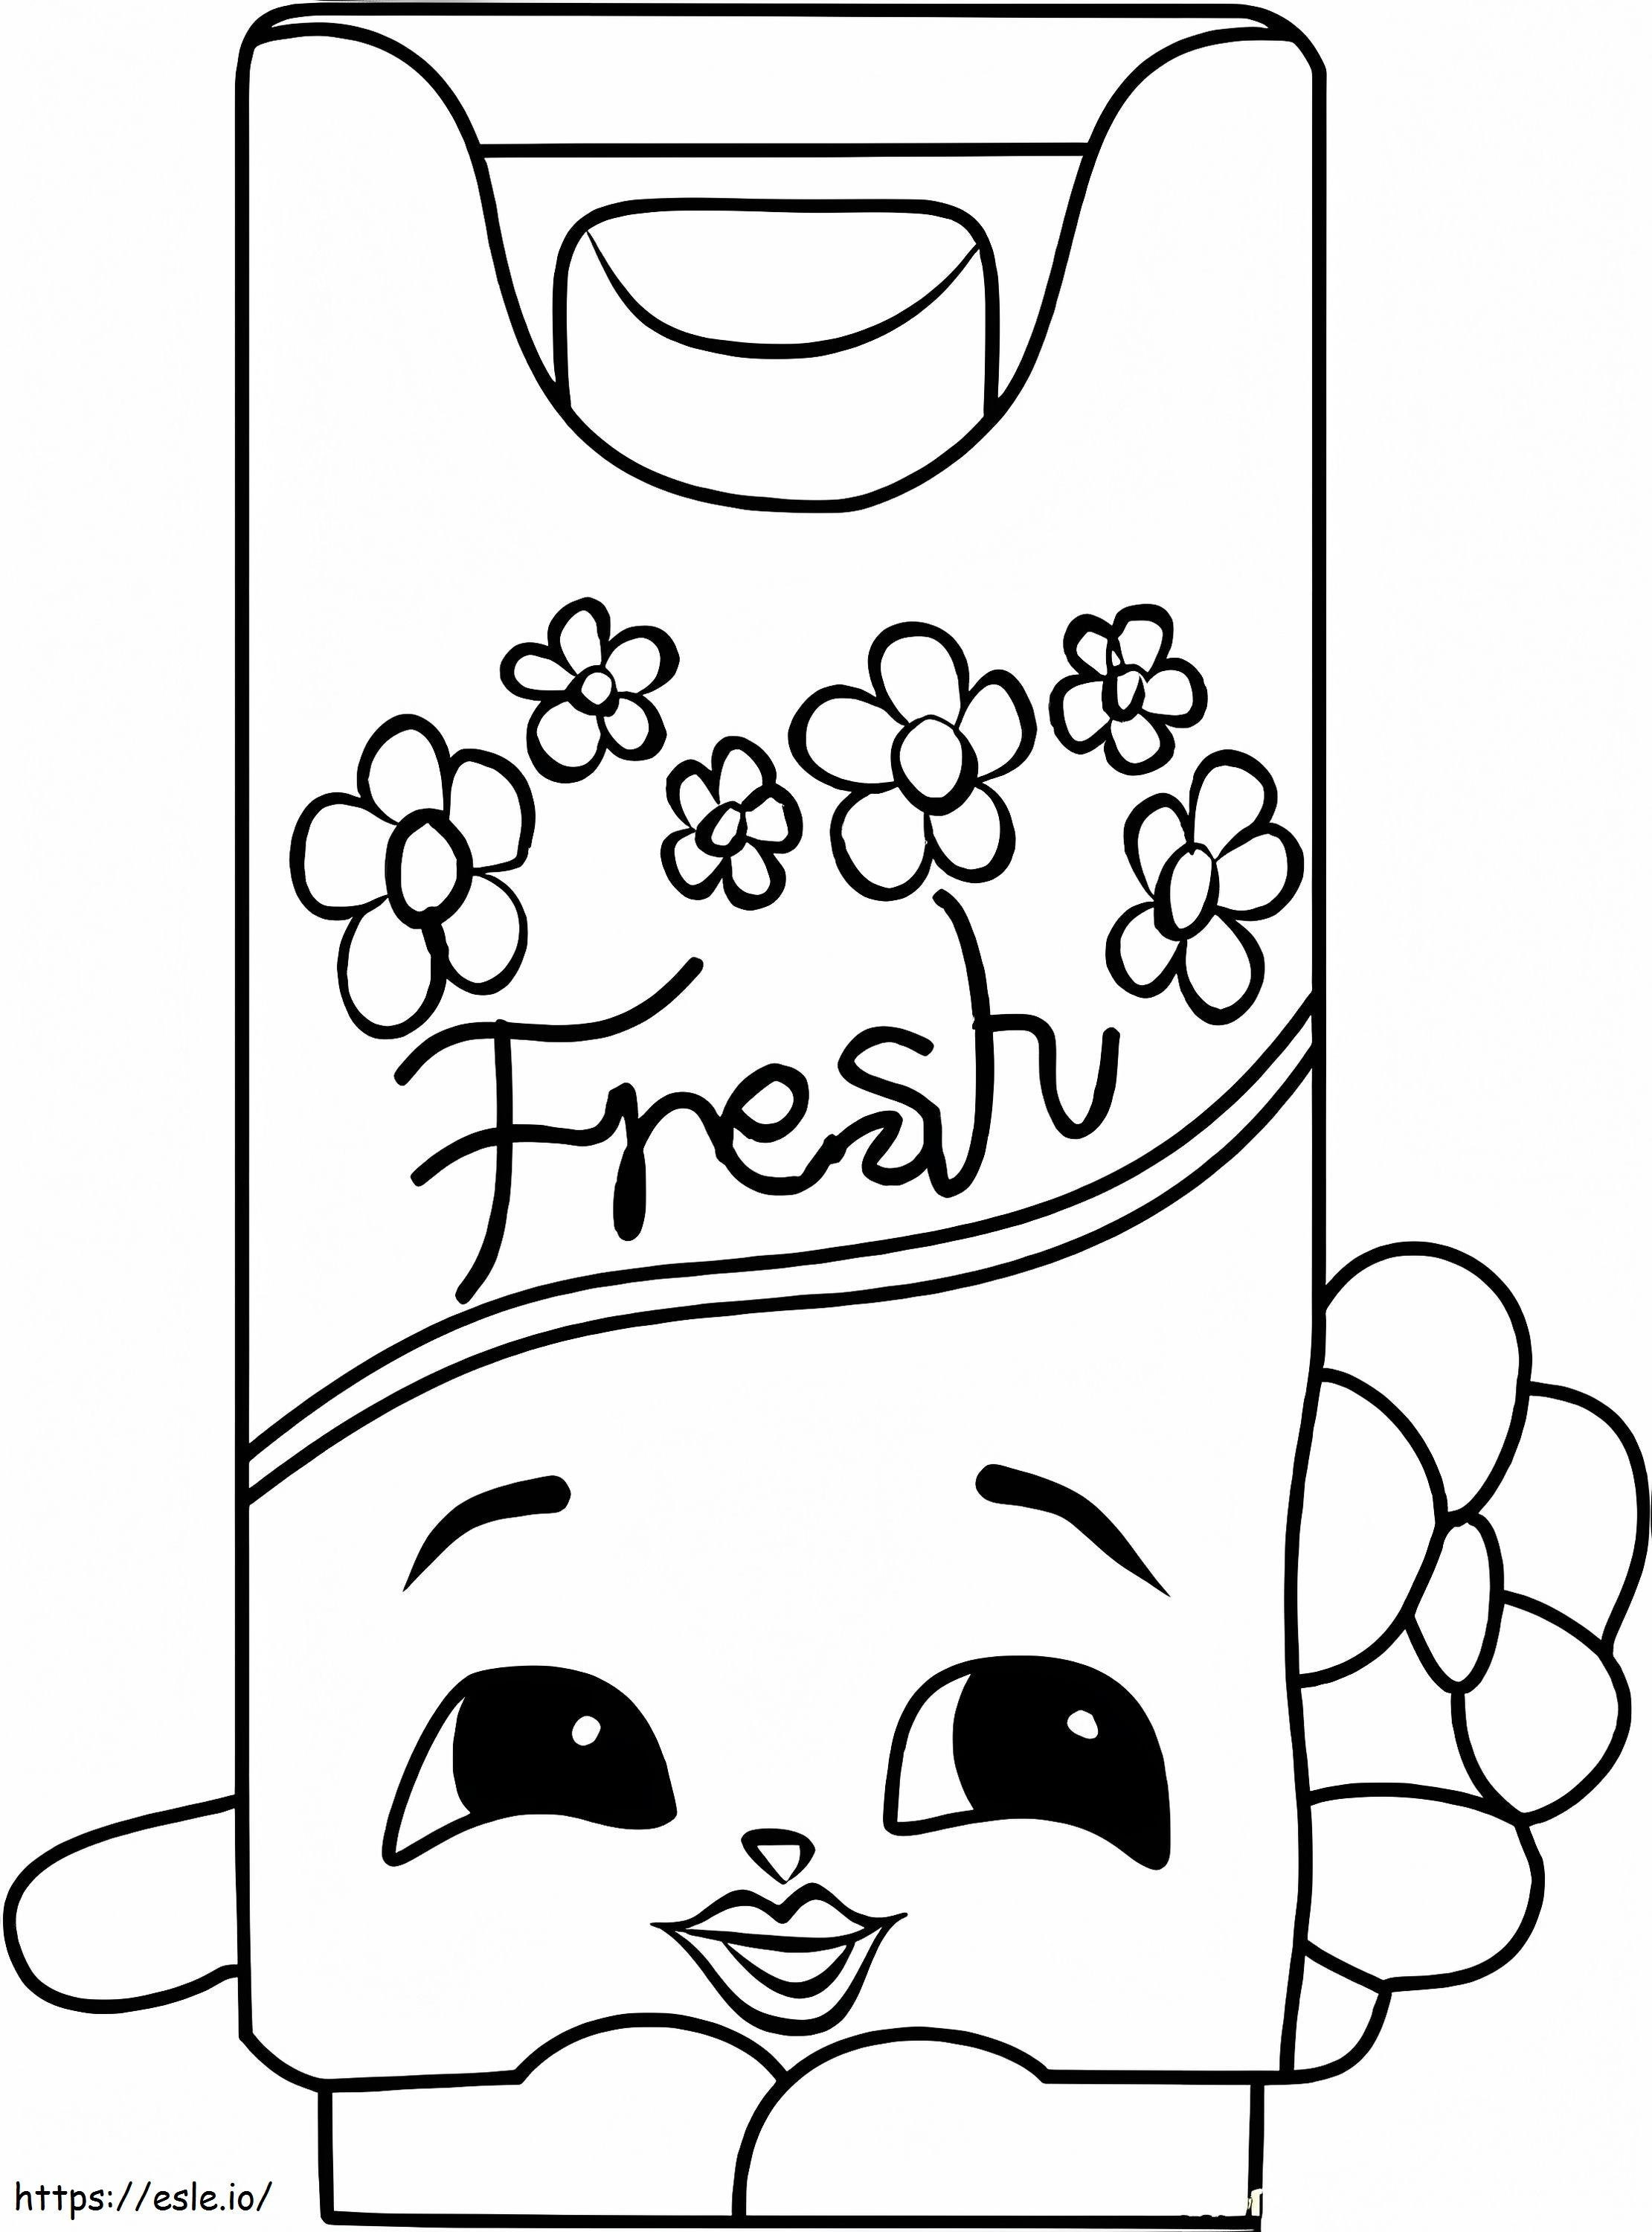 Bree Freshener Shopkins coloring page